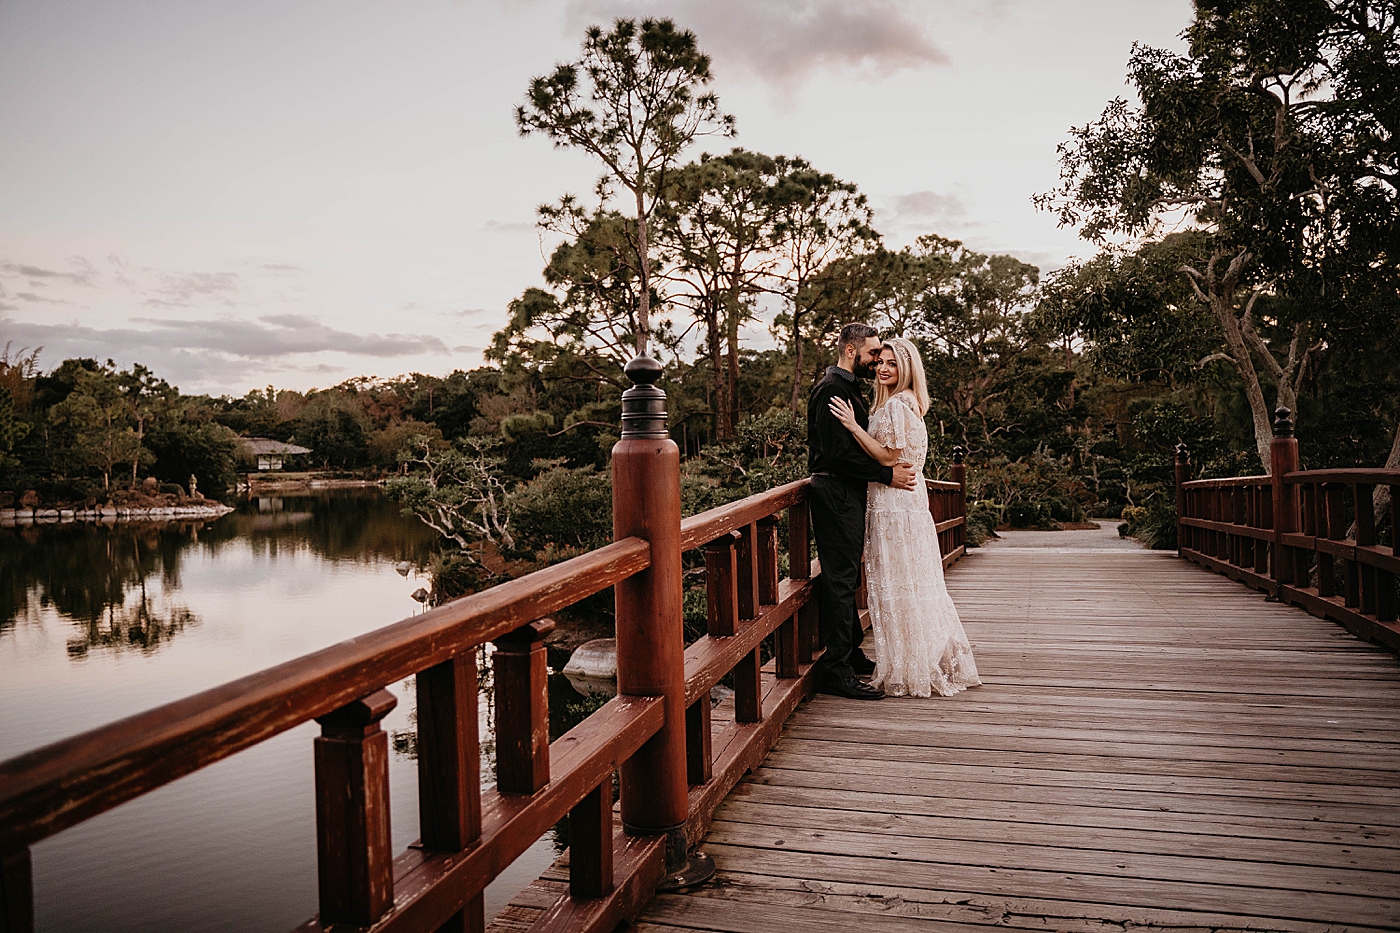 Couple posing on Japanese inspired bridge Morikami Museum and Japanese Gardens Engagement Photography captured by Krystal Capone Photography